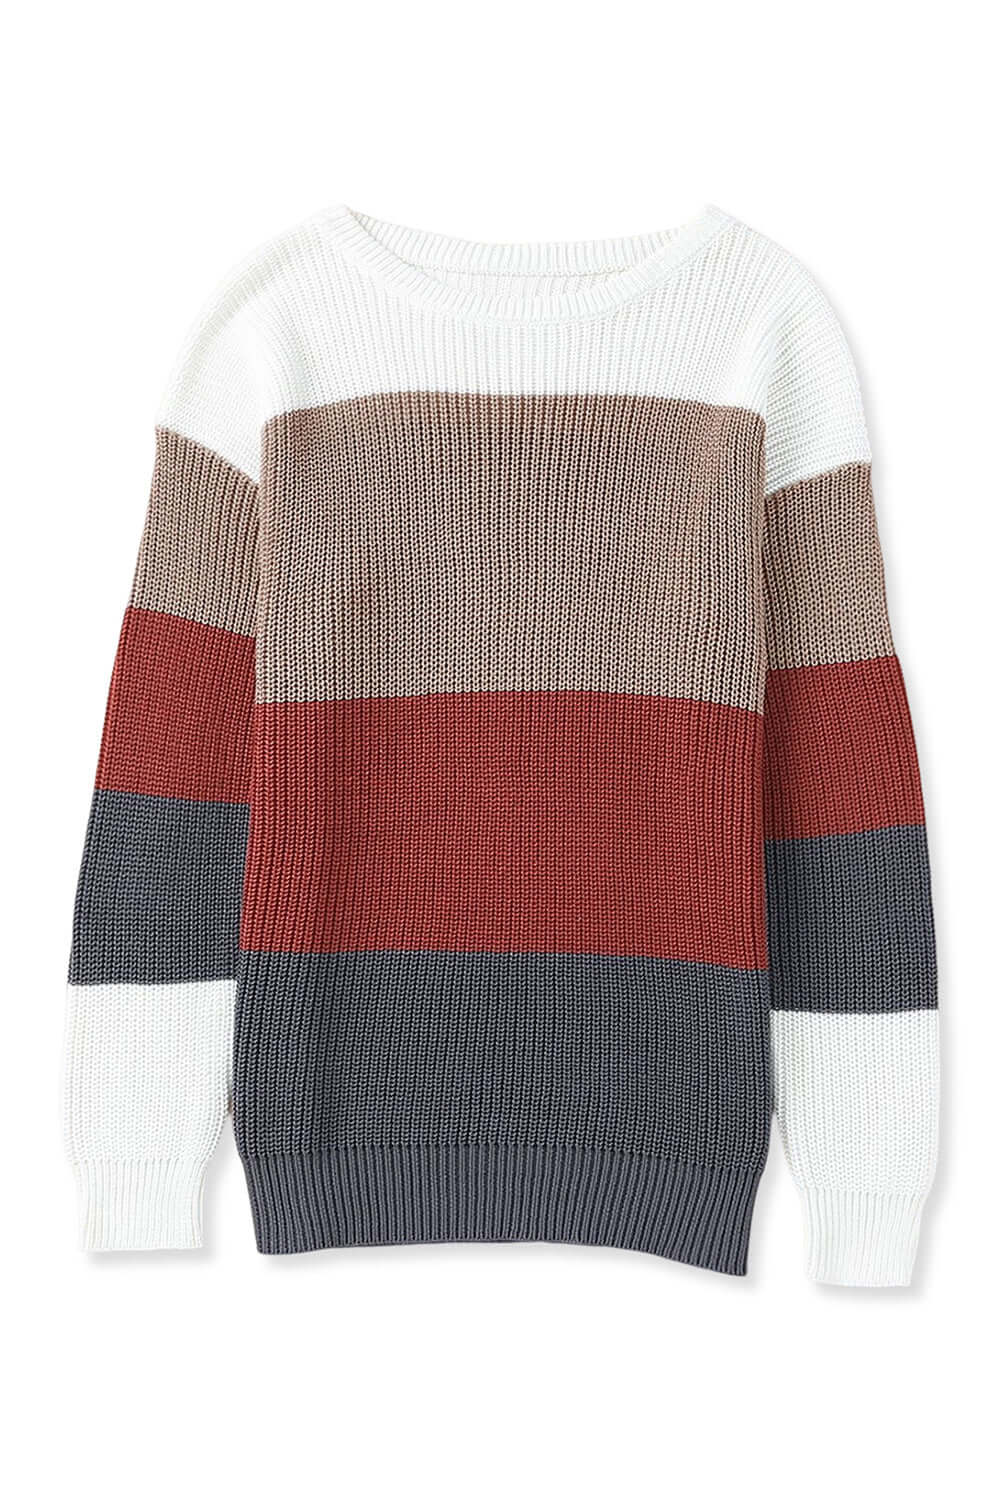 Color Block Knitted O-neck Pullover Sweater - Dixie Hike & Style